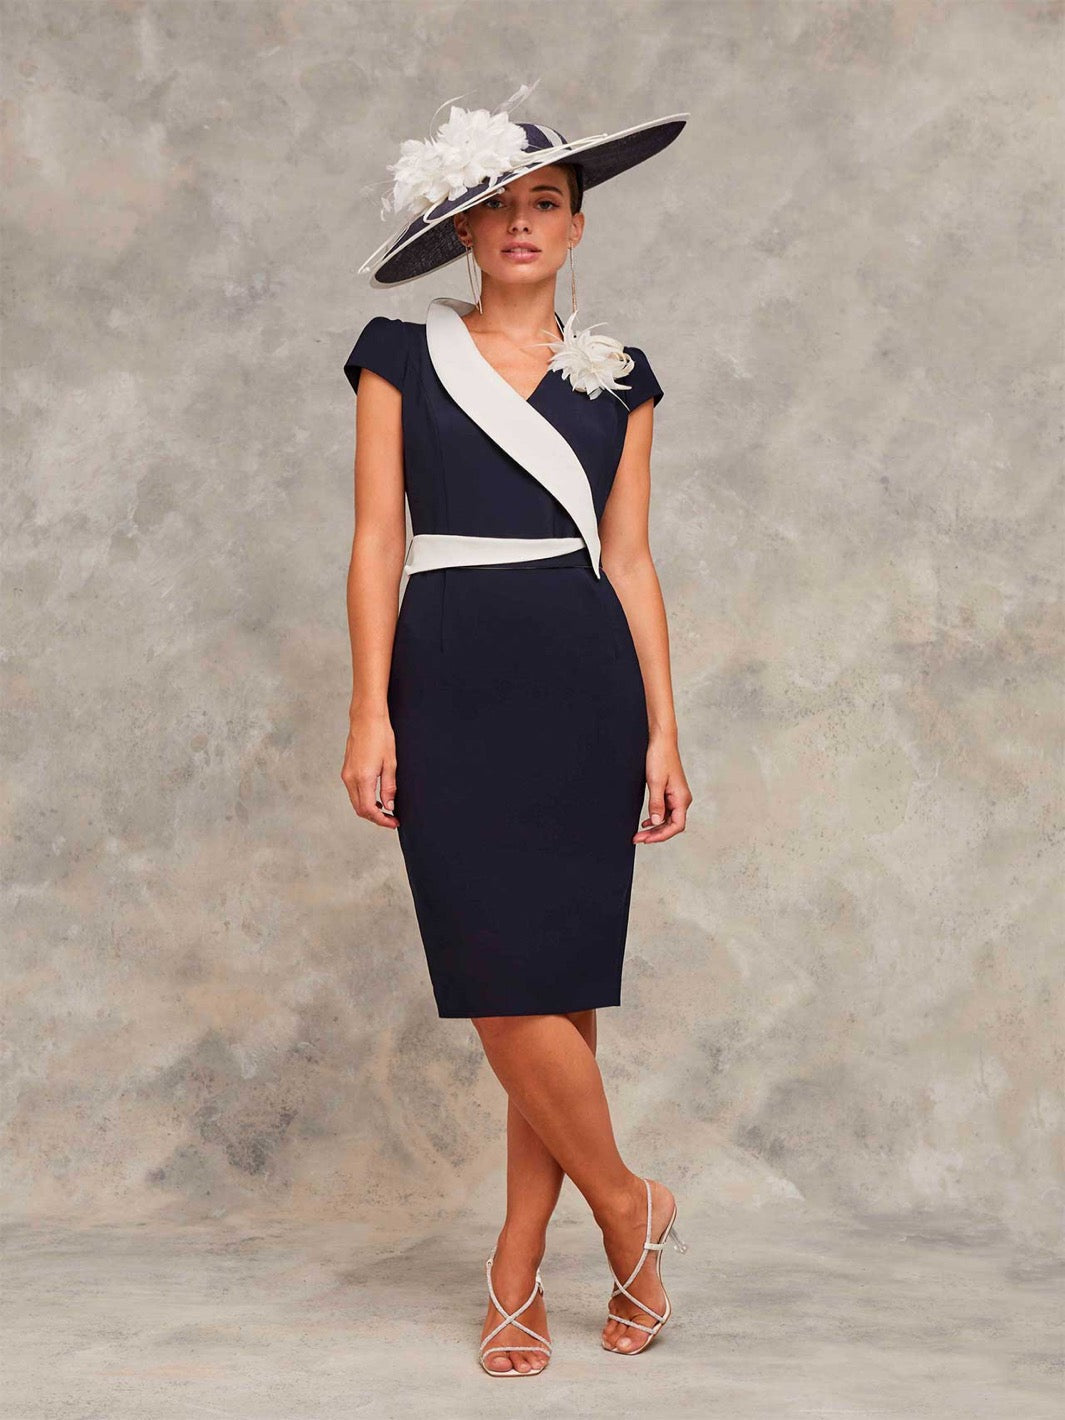 Claudia C Dali Dress In Navy / White - 717B-1202-Mother of the bride- mother of the groom -Nicola Ross